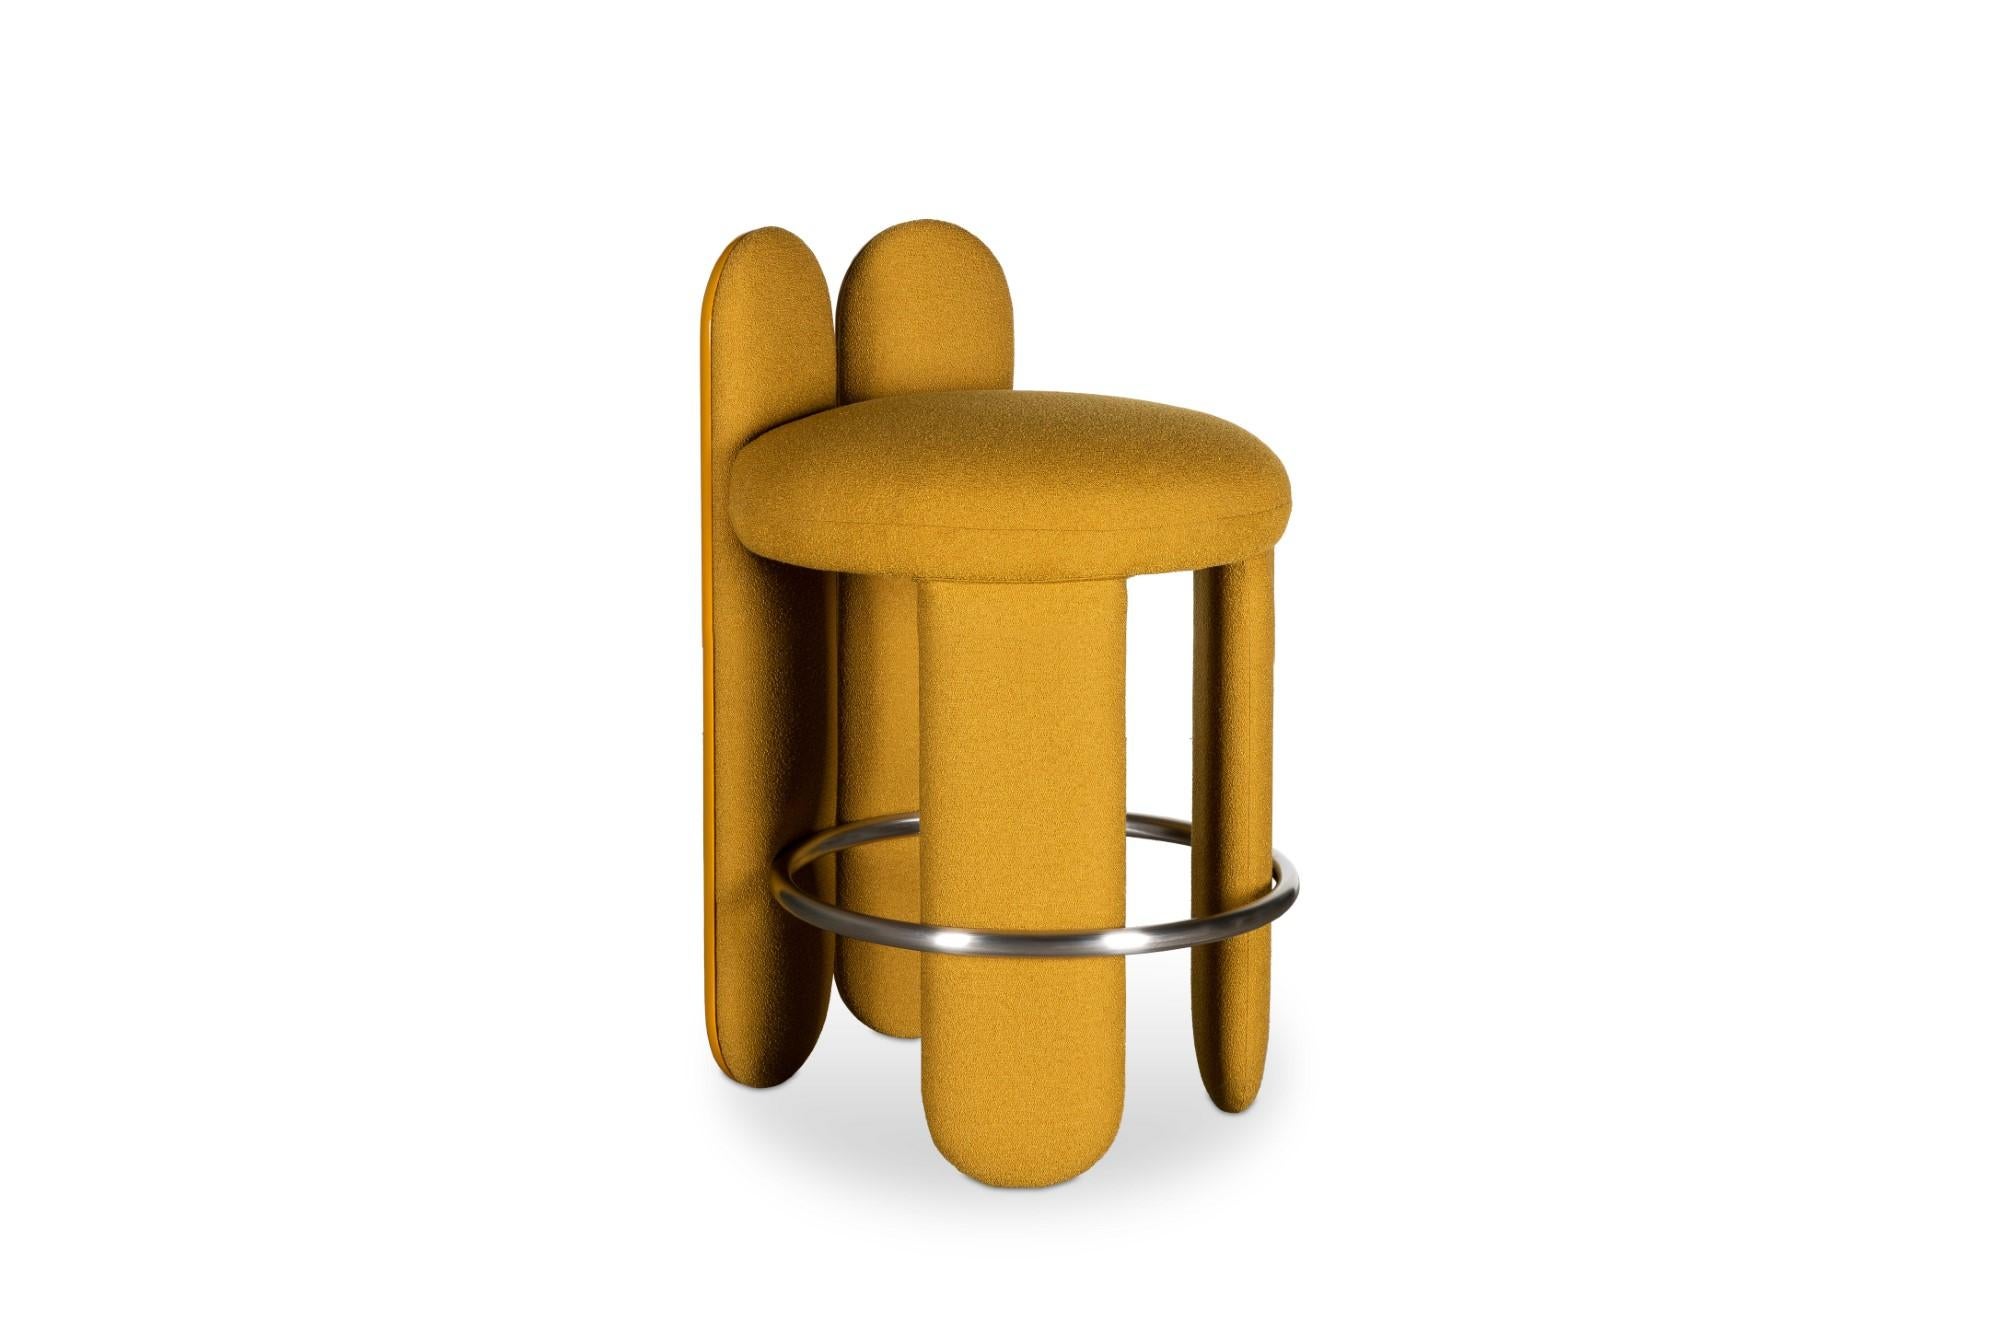 Glazy counter stool by Royal Stranger
Dimensions: width 55cm, height 90cm, depth 60cm, seat height 84cm
Materials: Solid wood frame, foam, upholstery, stainless steel.
Color: Lago Moutarde.
Available in brass, stainless steel or copper. Also